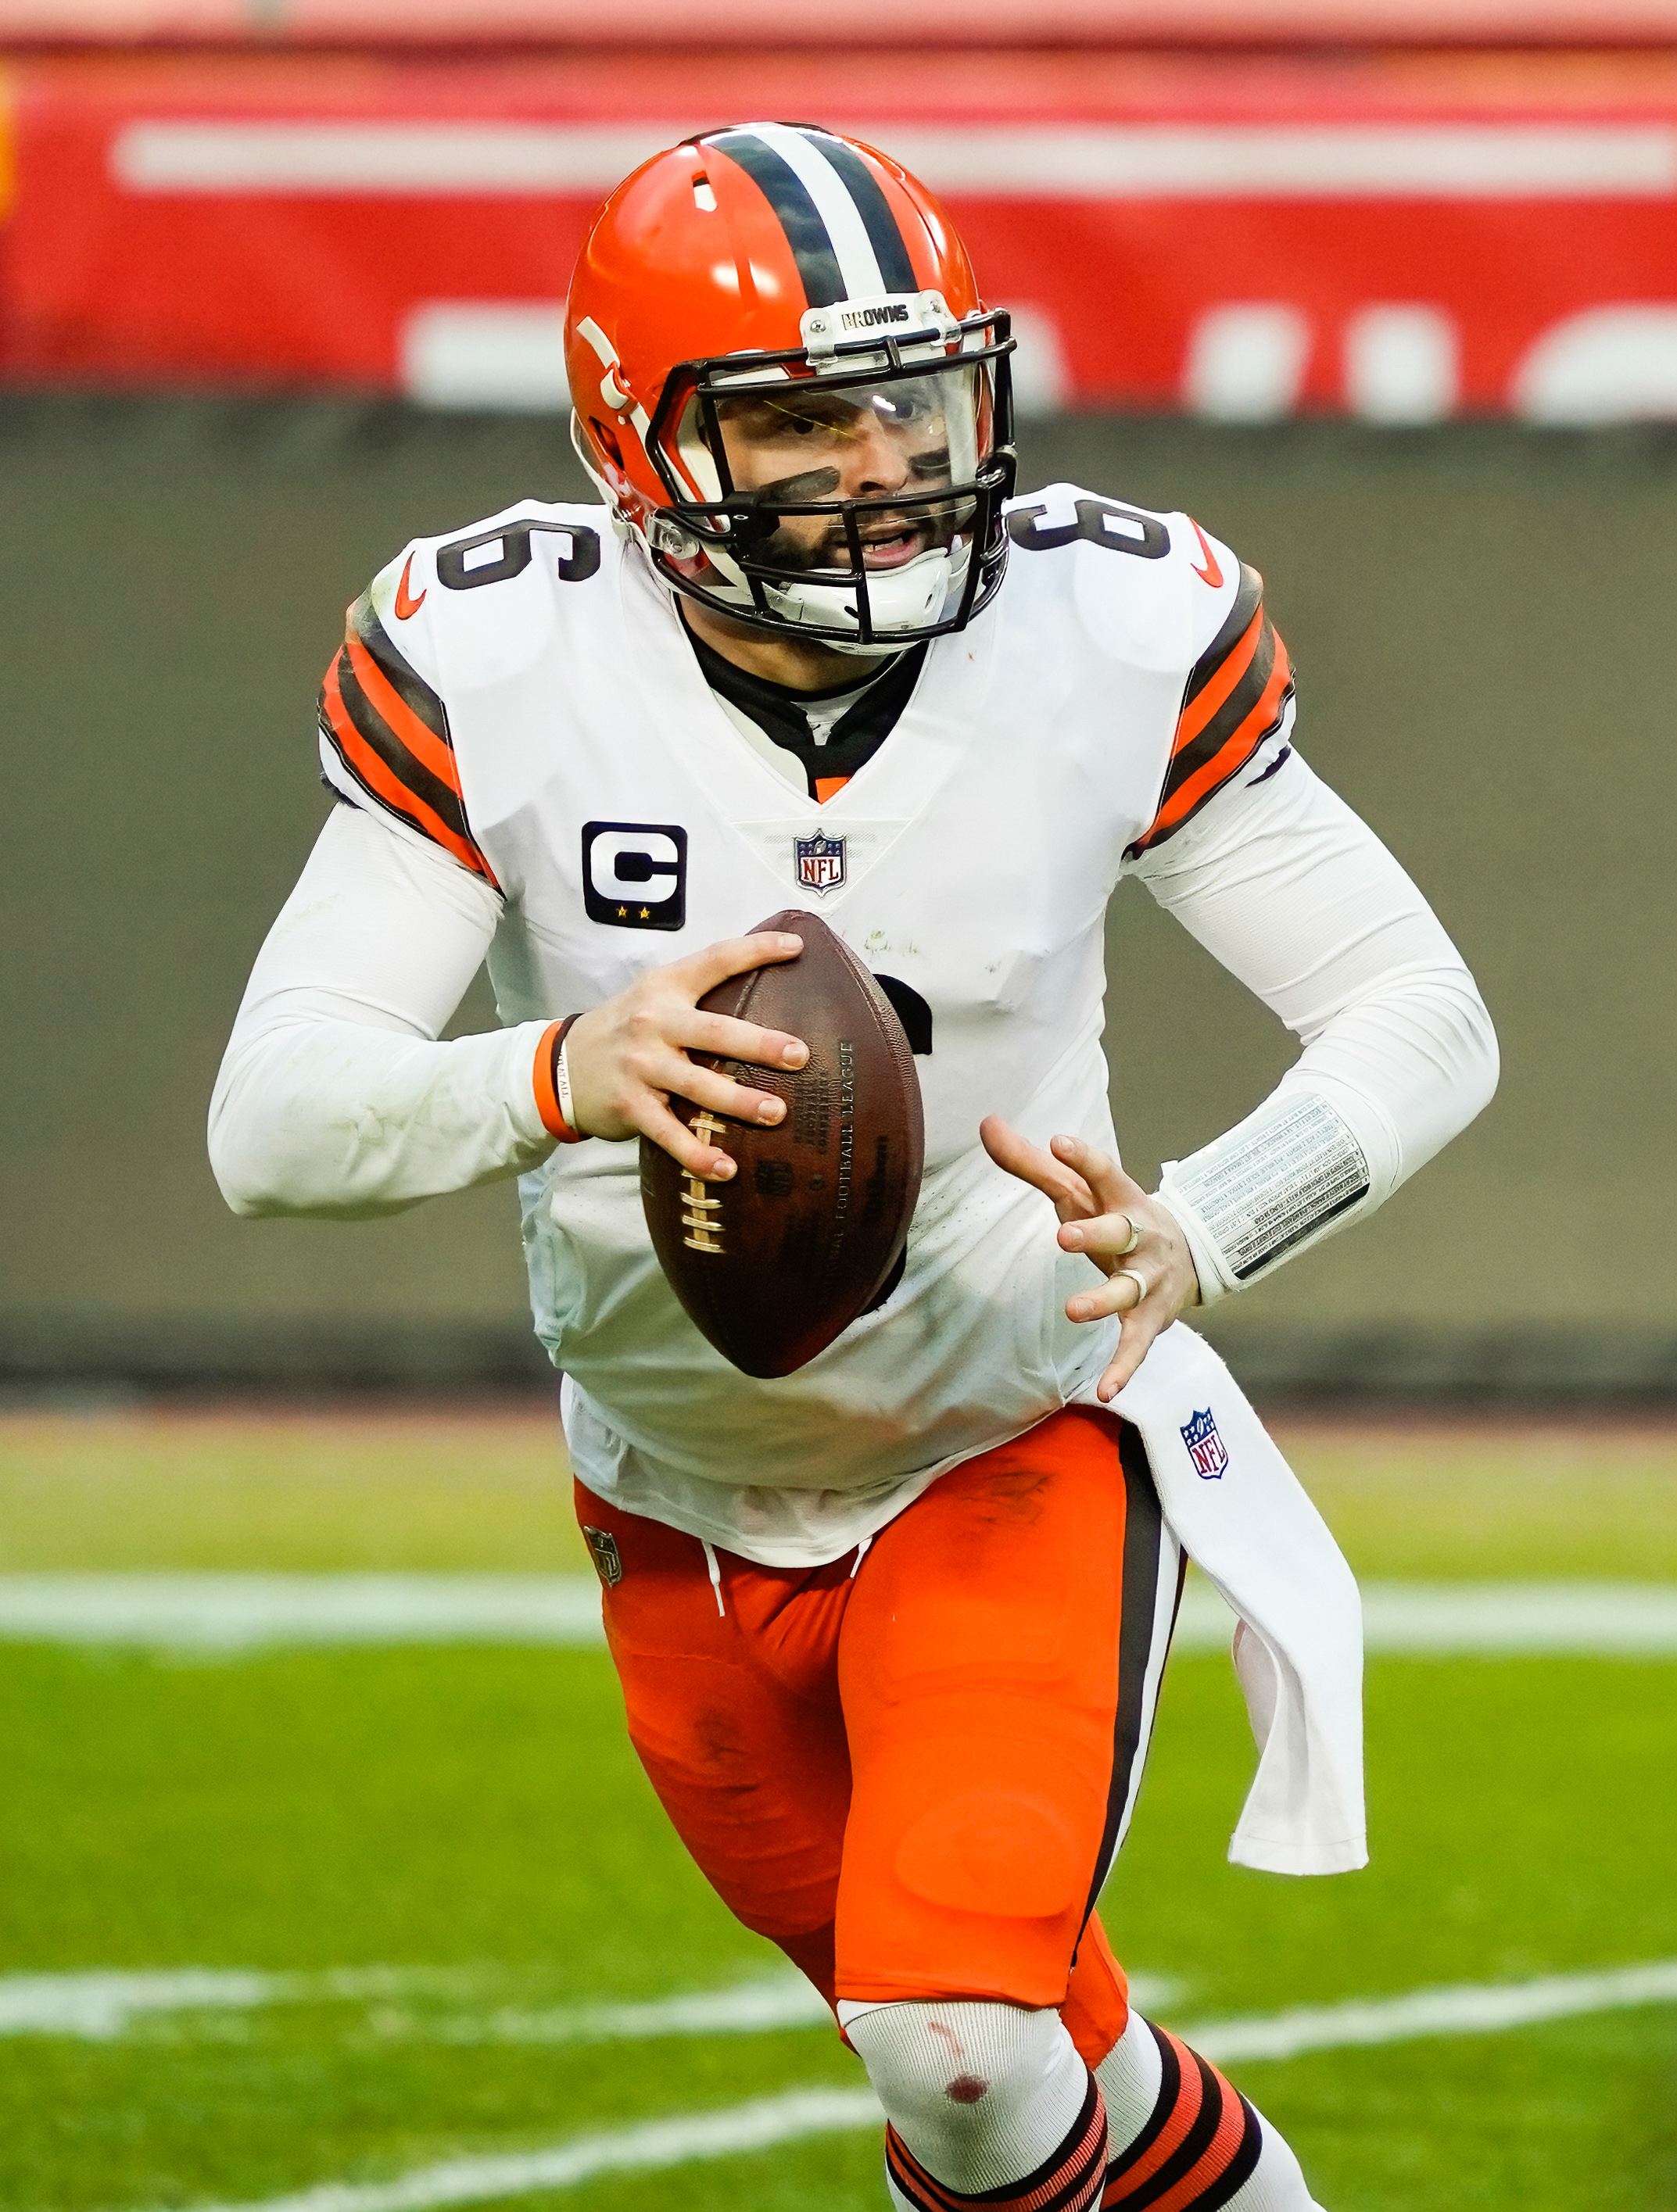 Latest On Baker Mayfield's Future With Browns